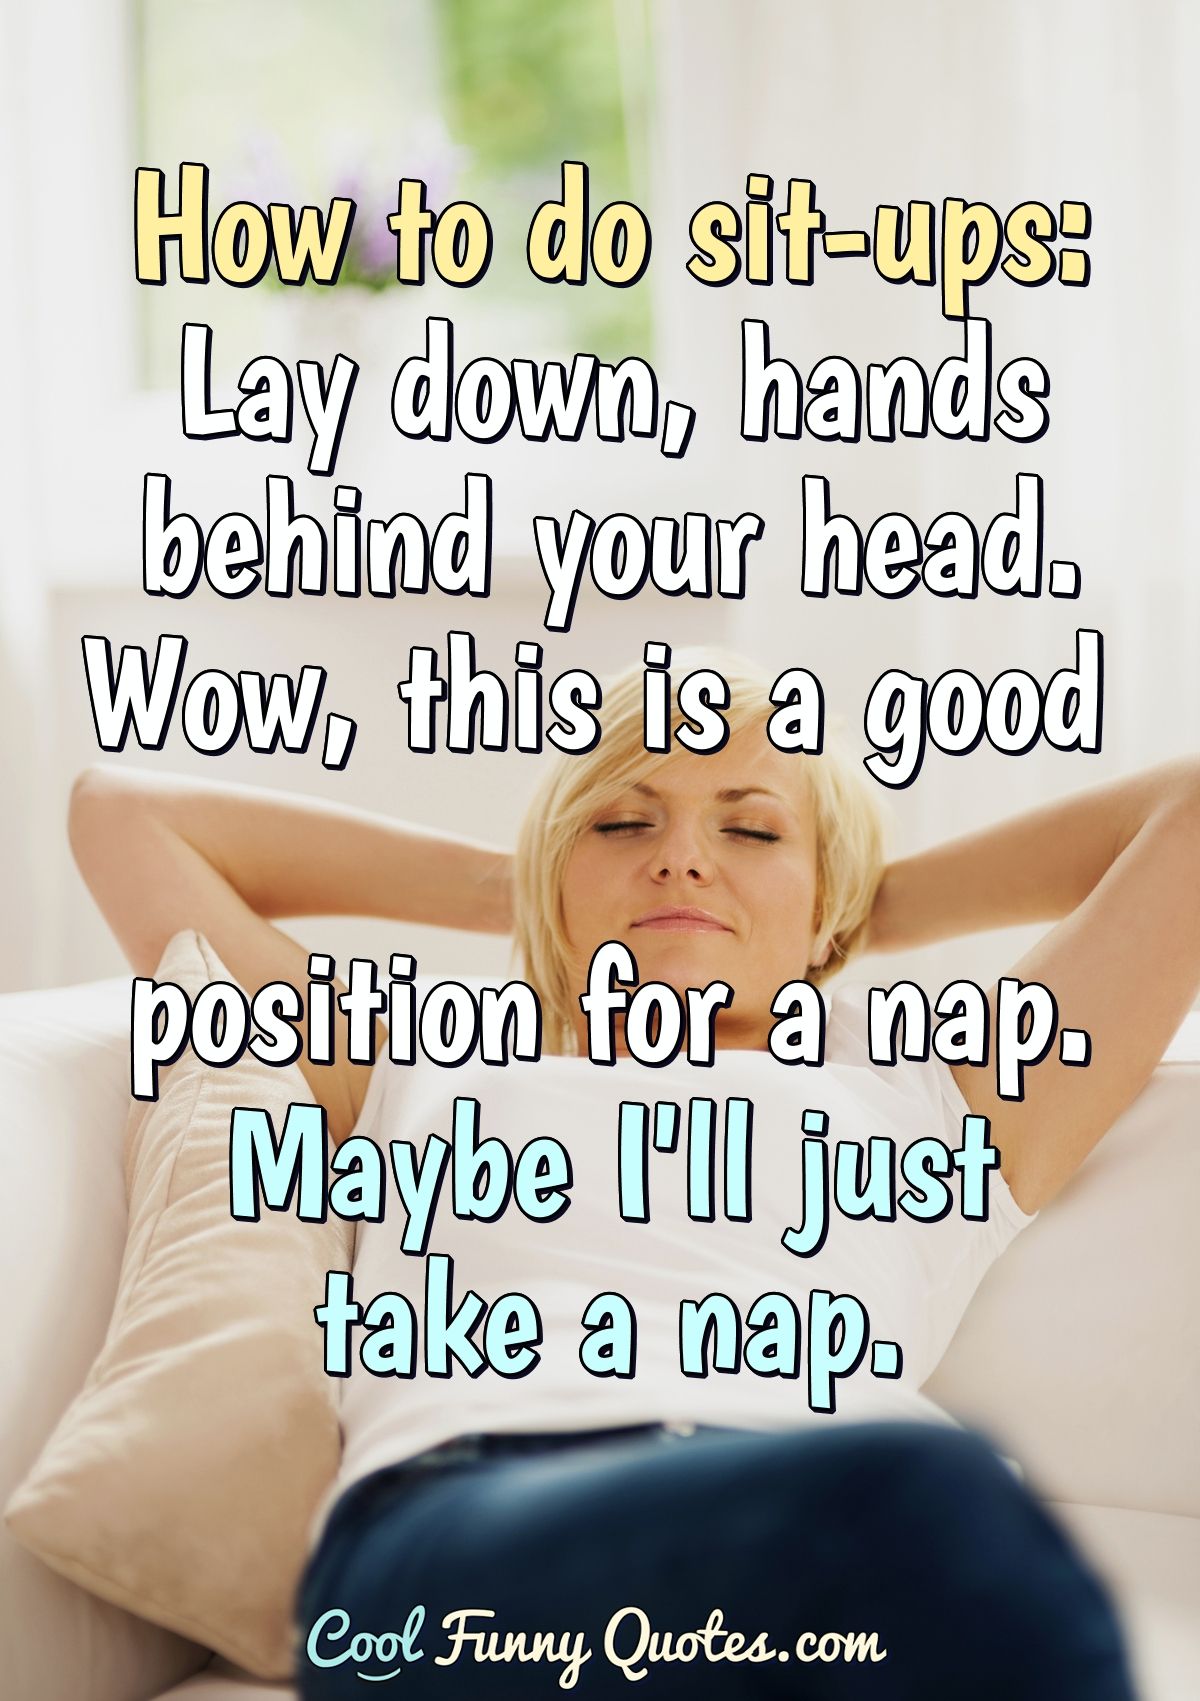 How to do sit-ups: Lay down, hands behind your head. Wow, this is a good...